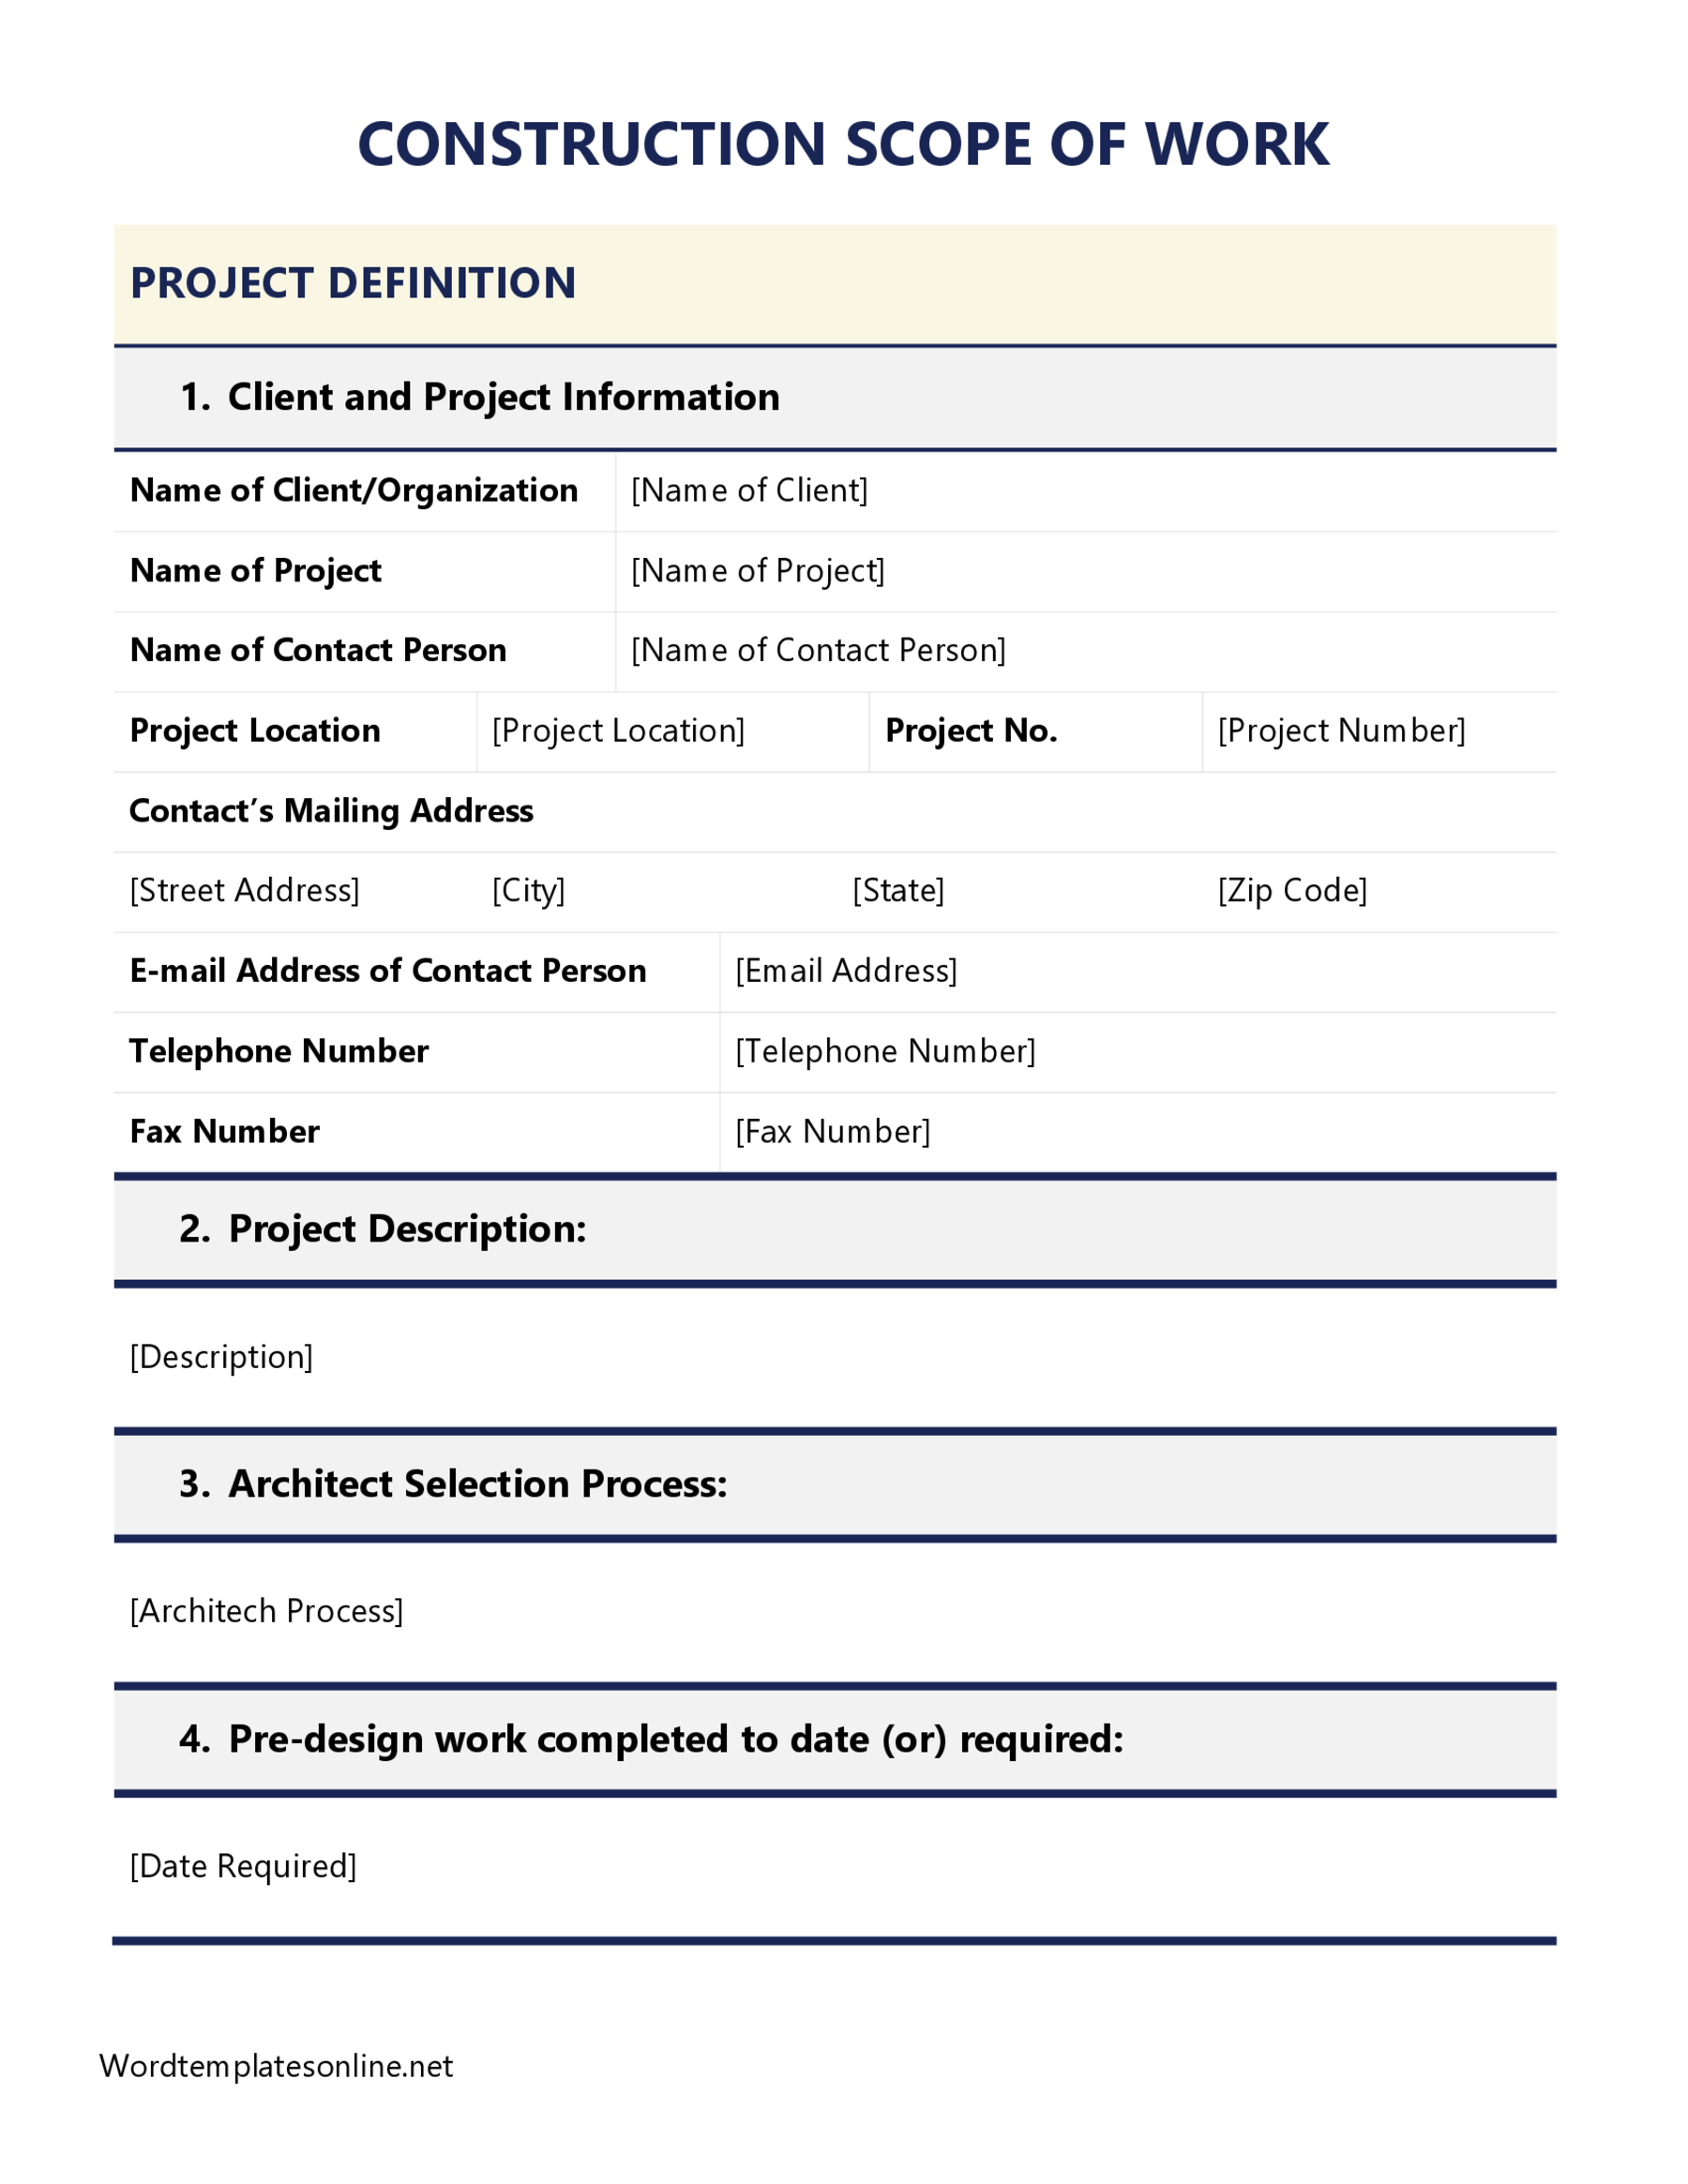 Printable Construction Scope of Work Format Sample